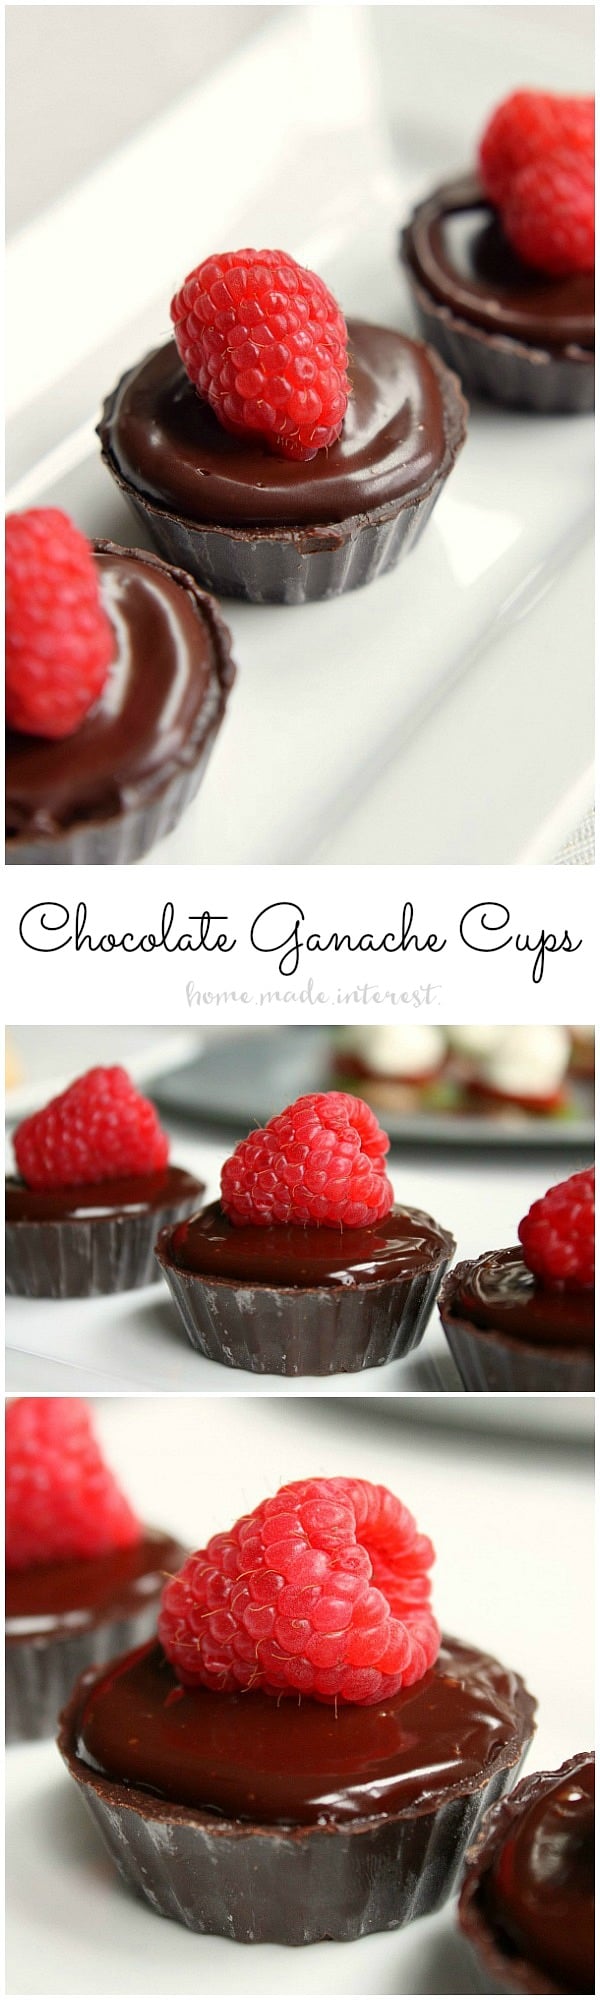 These Chocolate Ganache Cups are an easy chocolate dessert that will wow your guests at parties. 